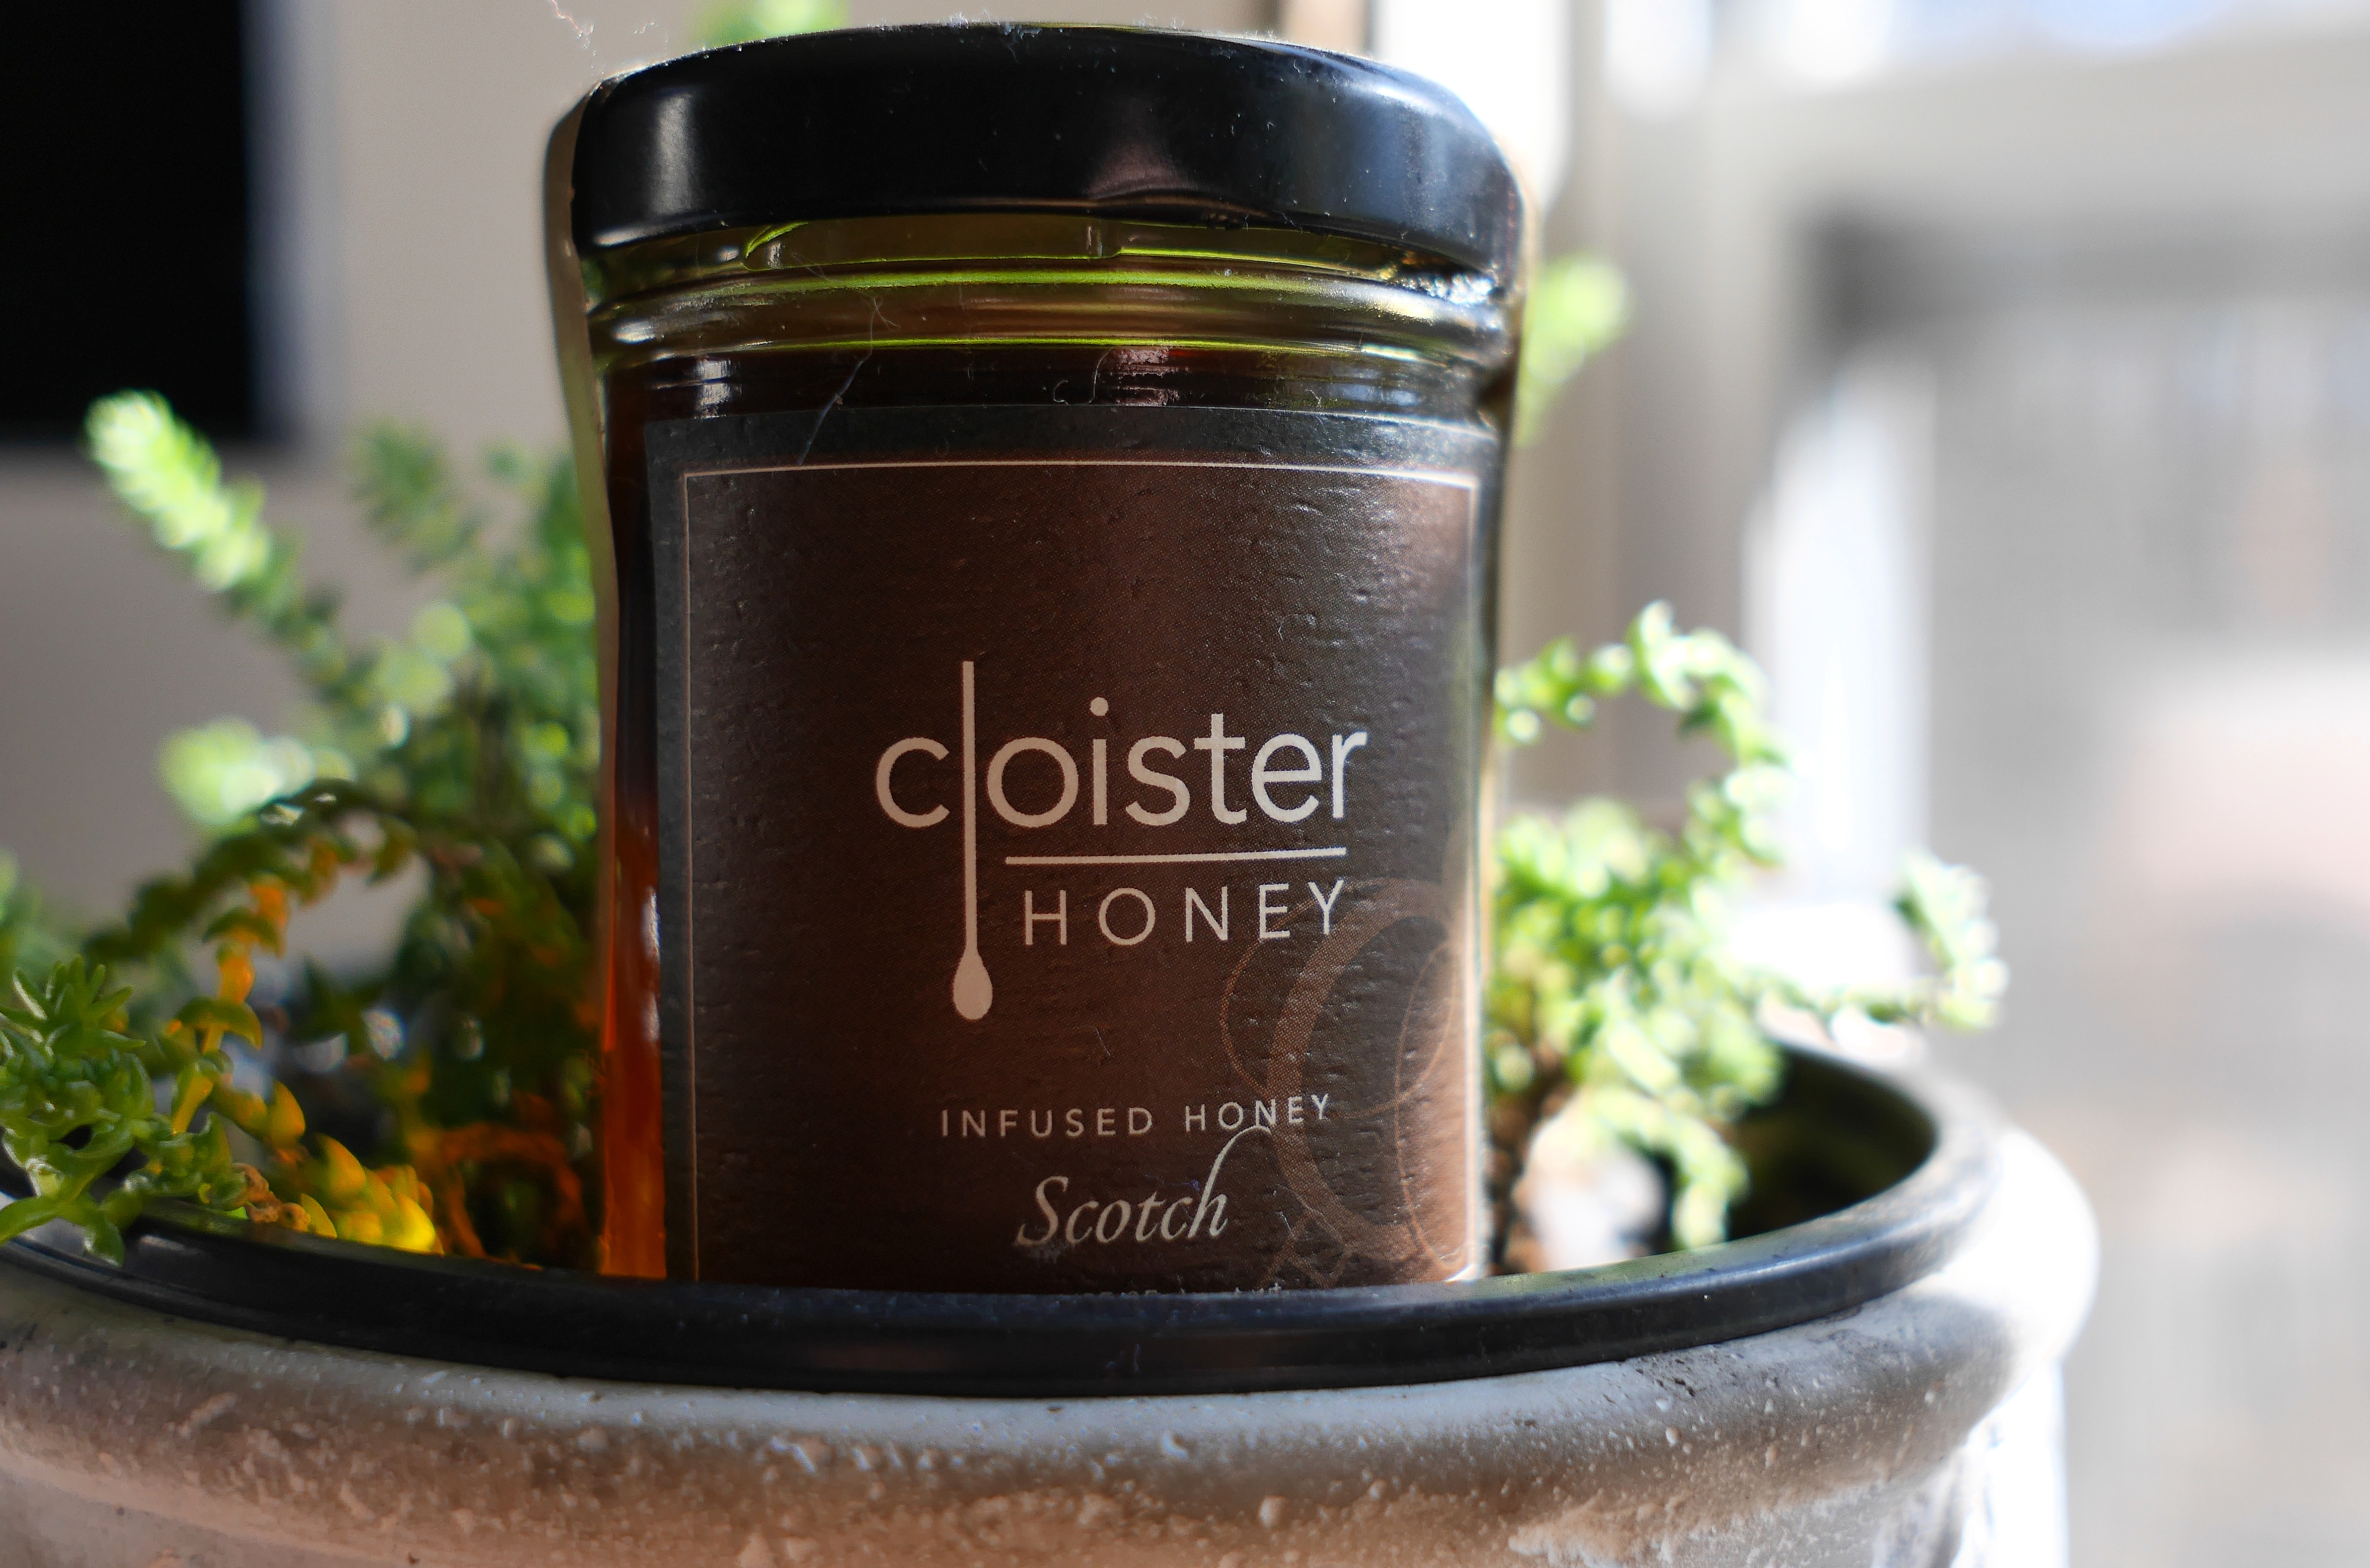 Cloister Infused Scotch Honey The Honey Review, Charlotte, NC